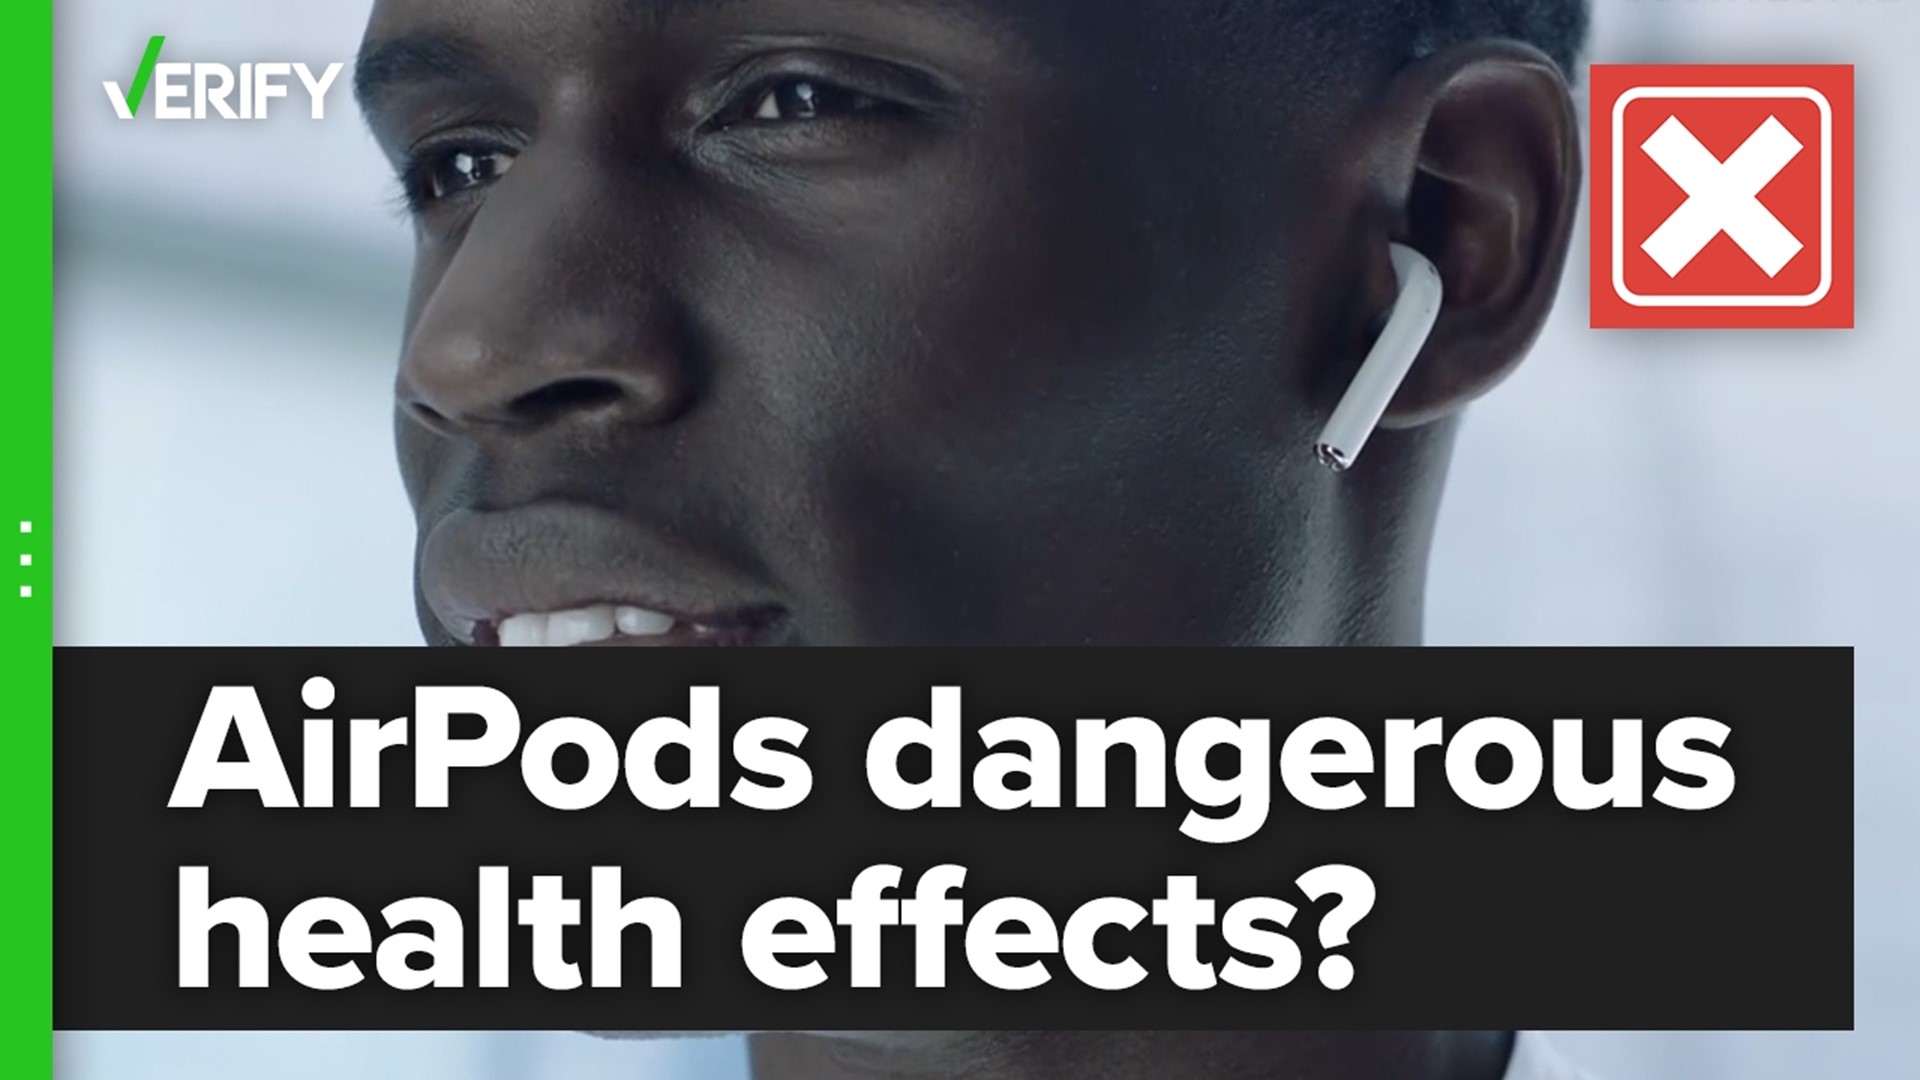 The VERIFY team looks into a claim saying that Apple’s AirPods transmit dangerous levels of electromagnetic waves. Sources from the FCC confirm this is false.